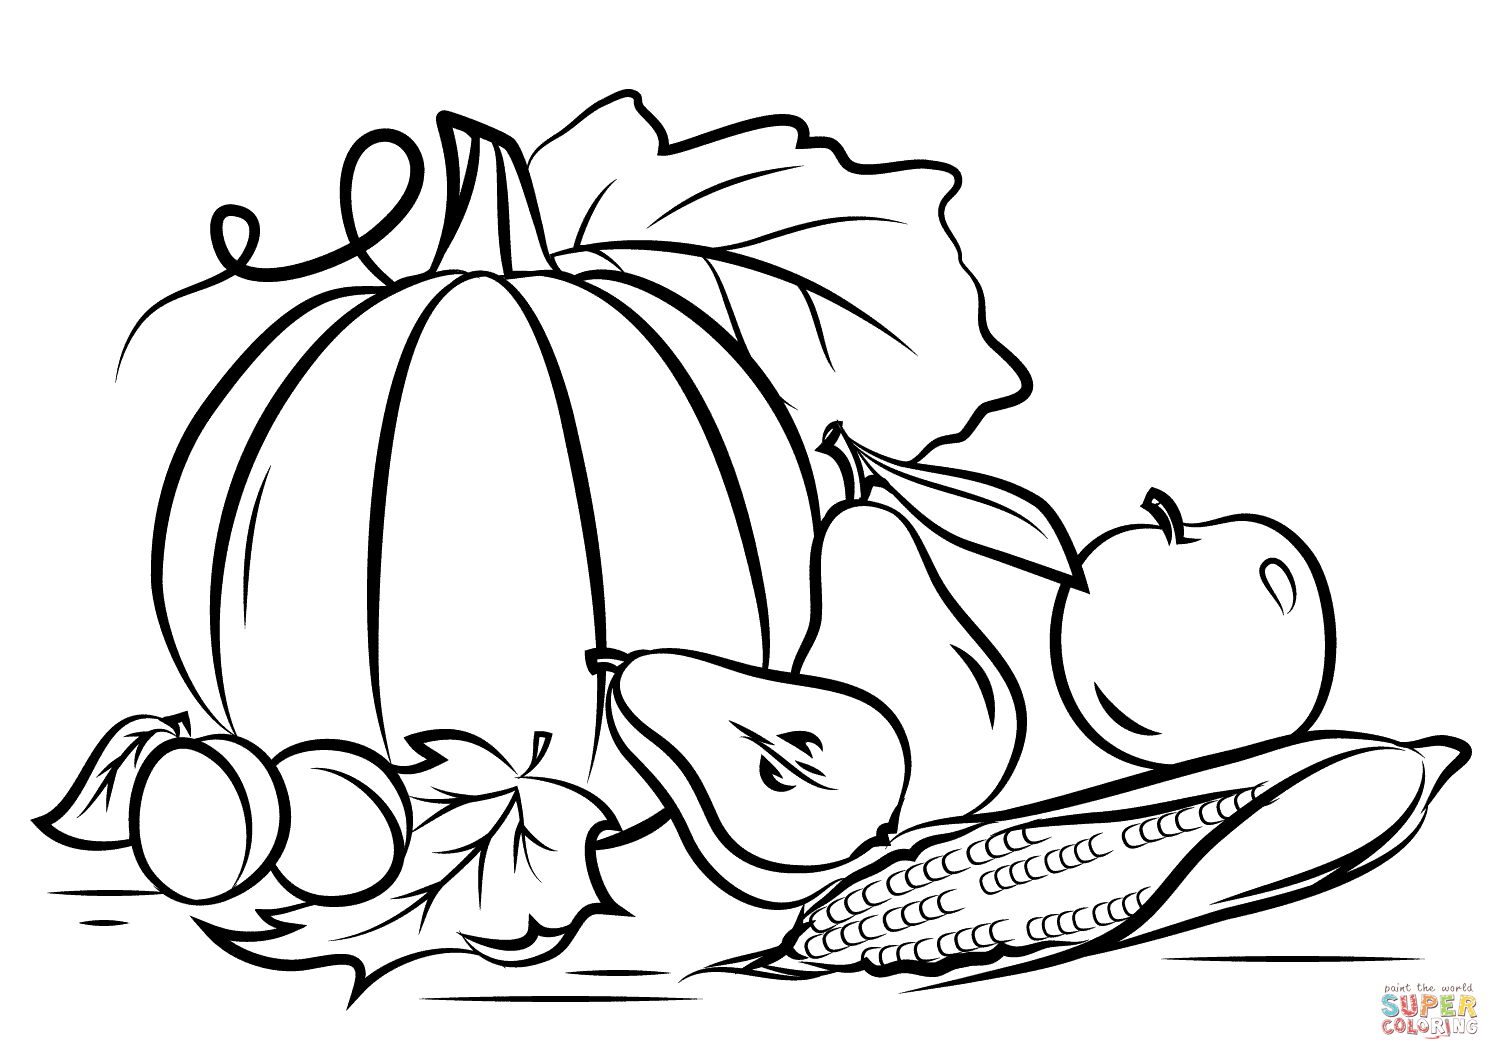 Autumn Harvest Coloring Page | Free Printable Coloring Pages | Colouring Worksheets Printable